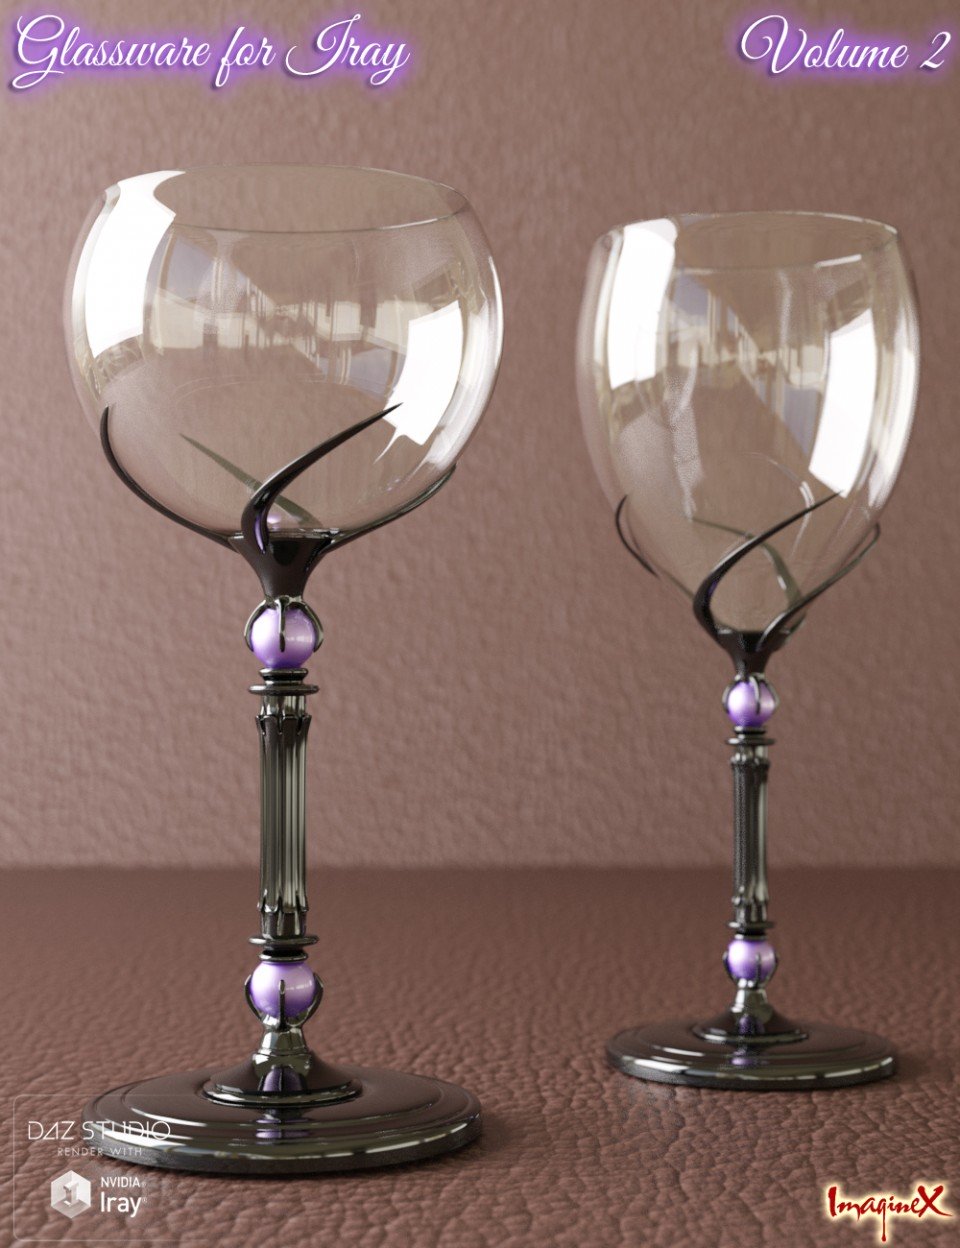 Glassware Collection for Iray Vol. 2_DAZ3D下载站